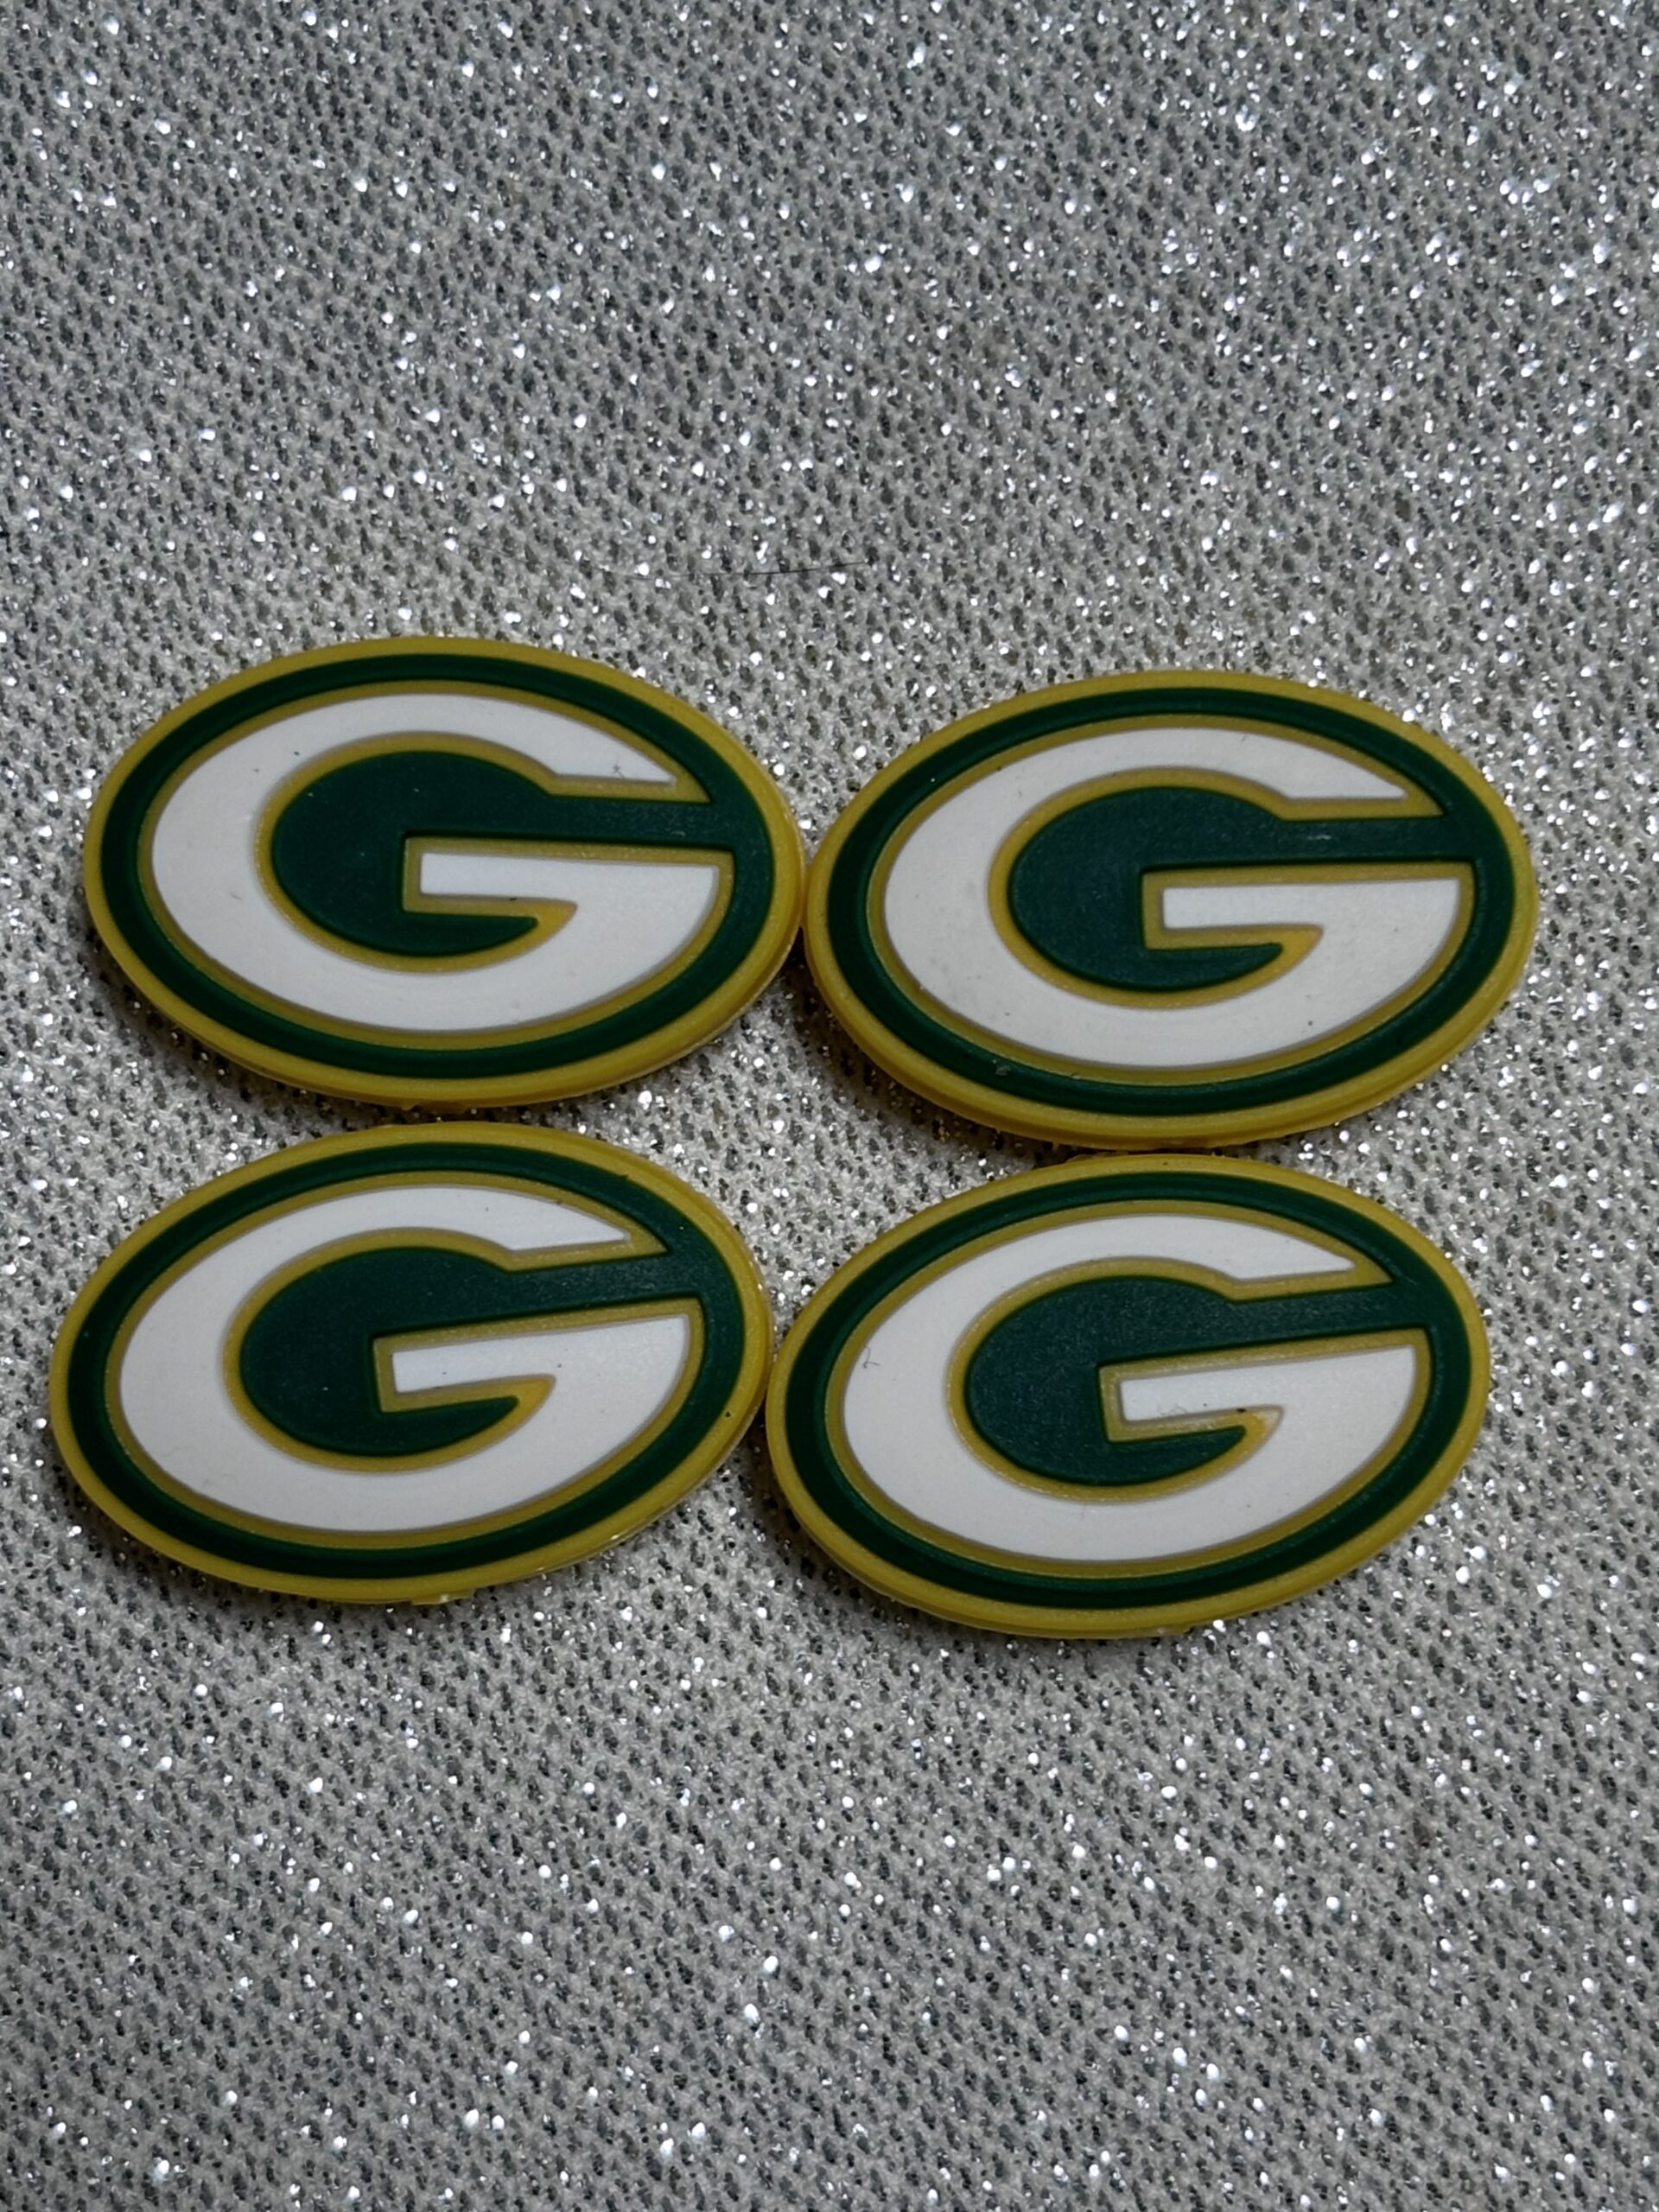 Green Bay Packers beads